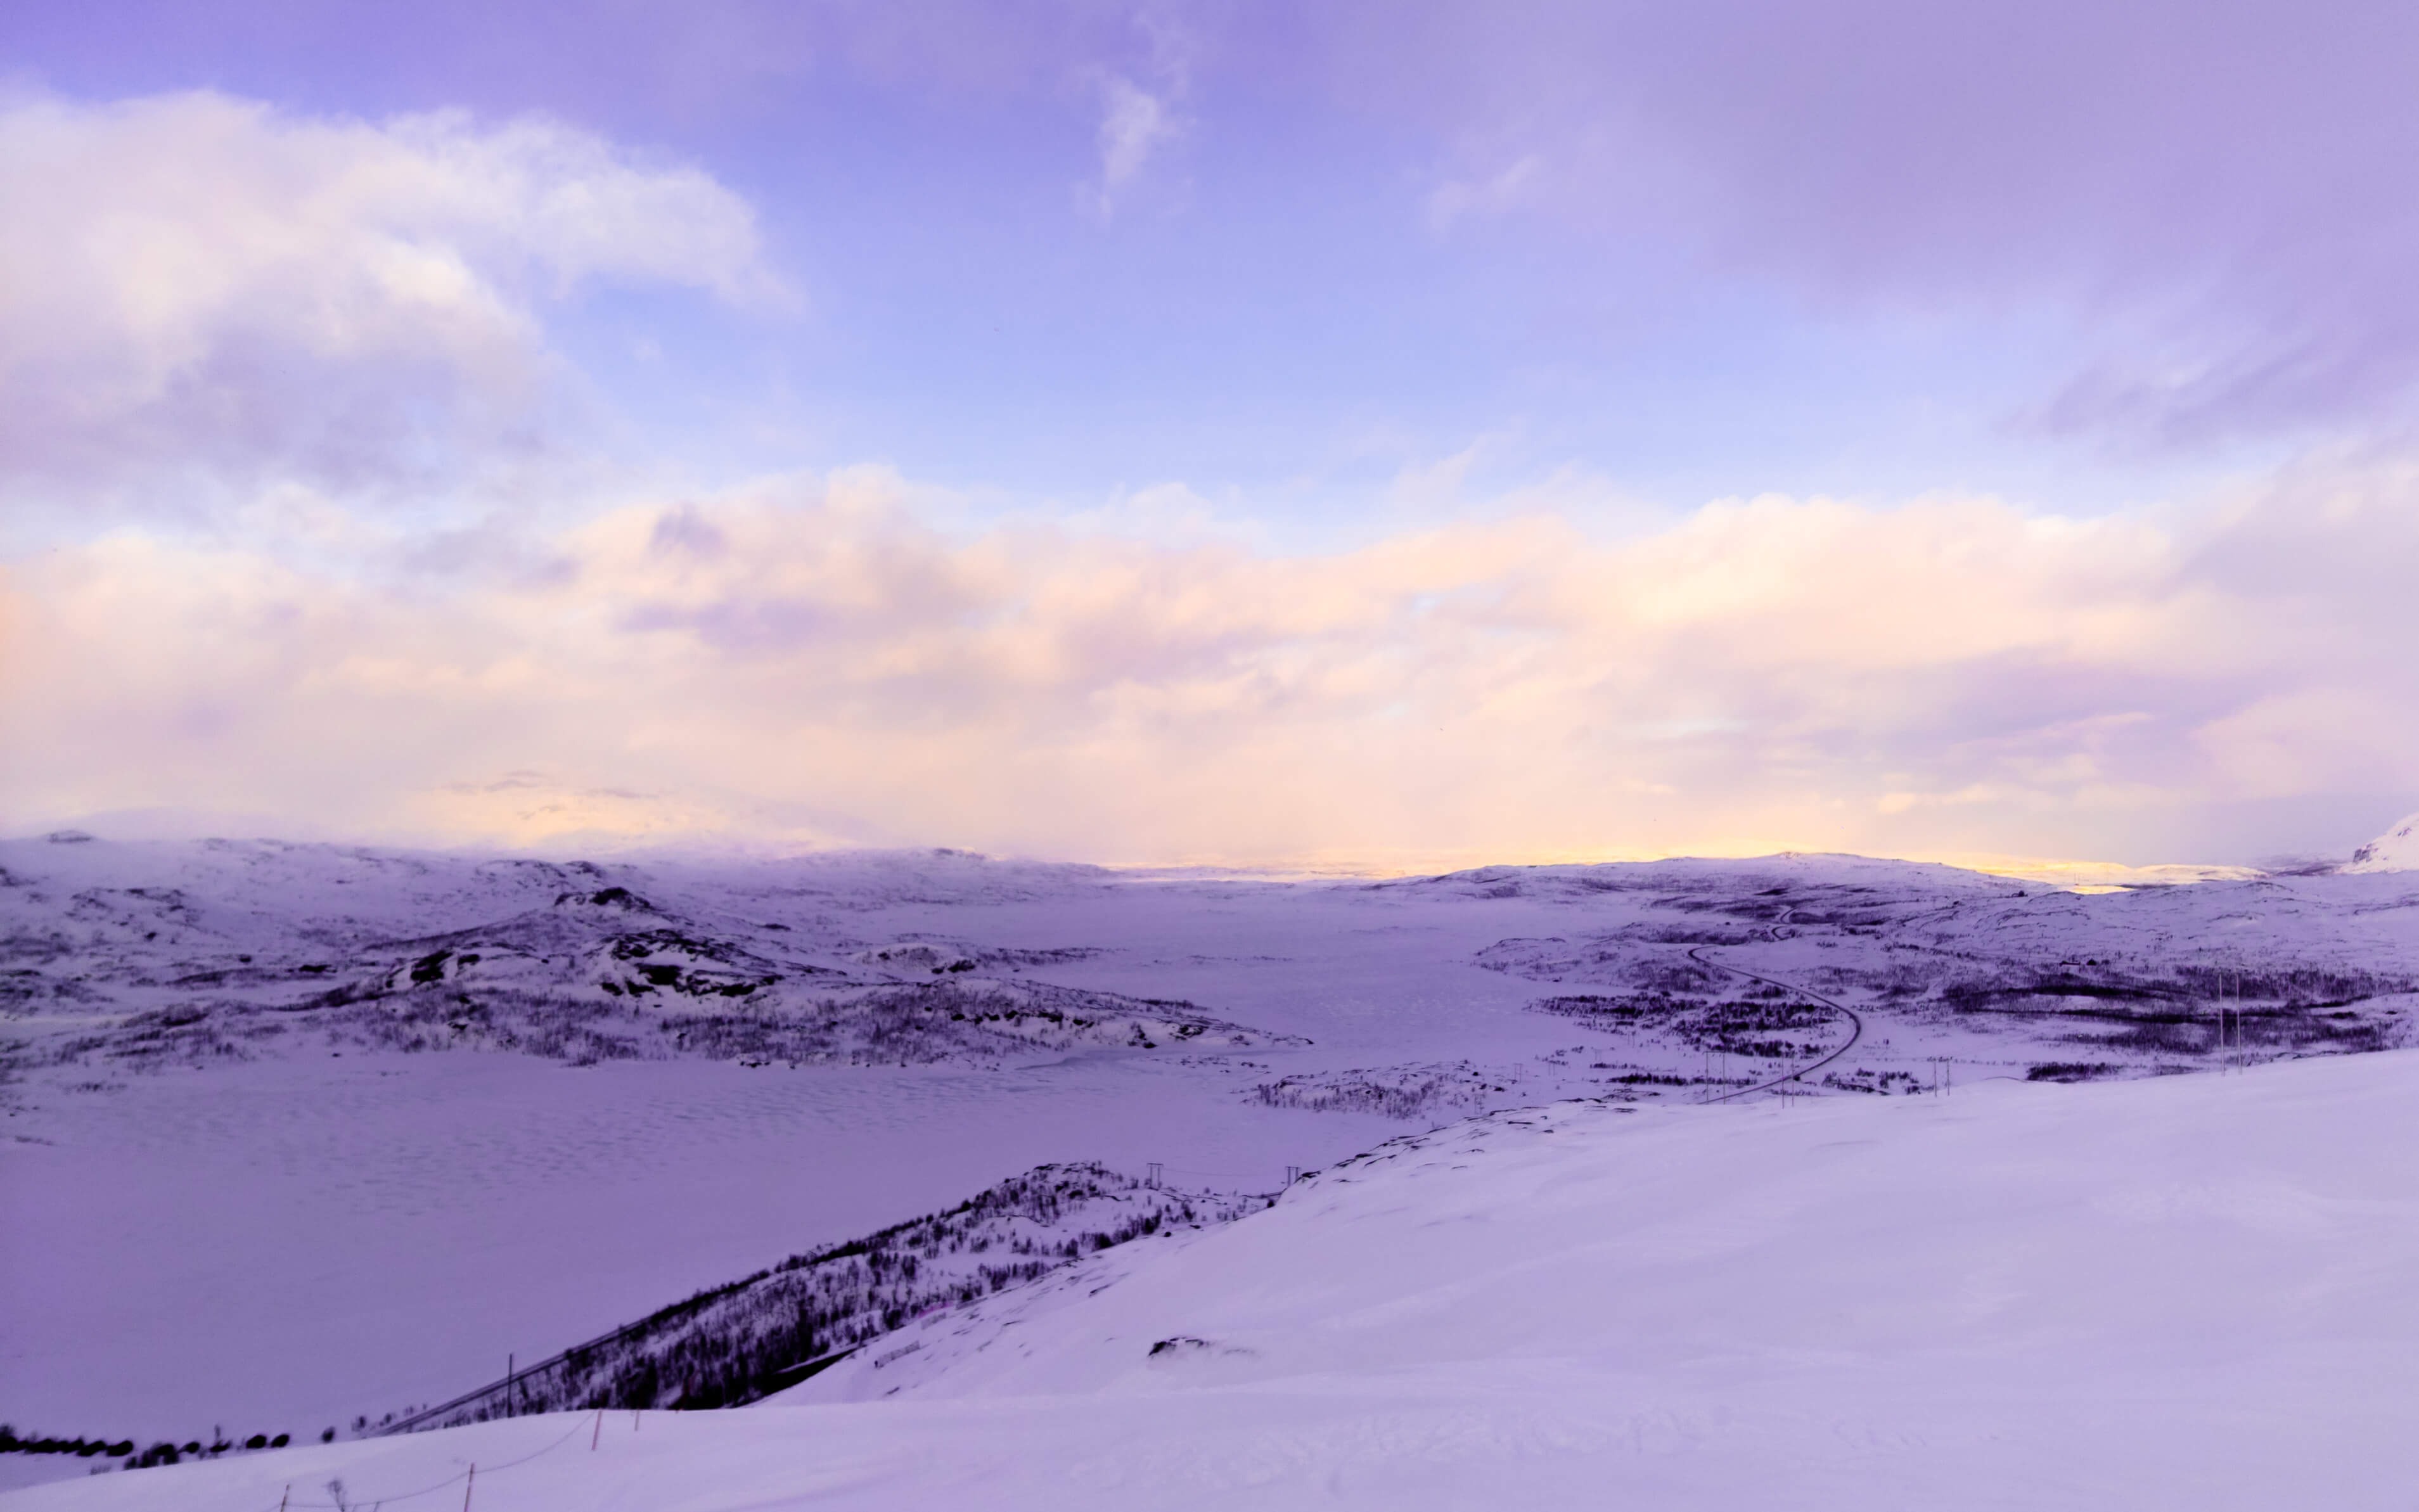 Photo from the top of a mountain in winter towards a valley with mountanous terrain on the other side